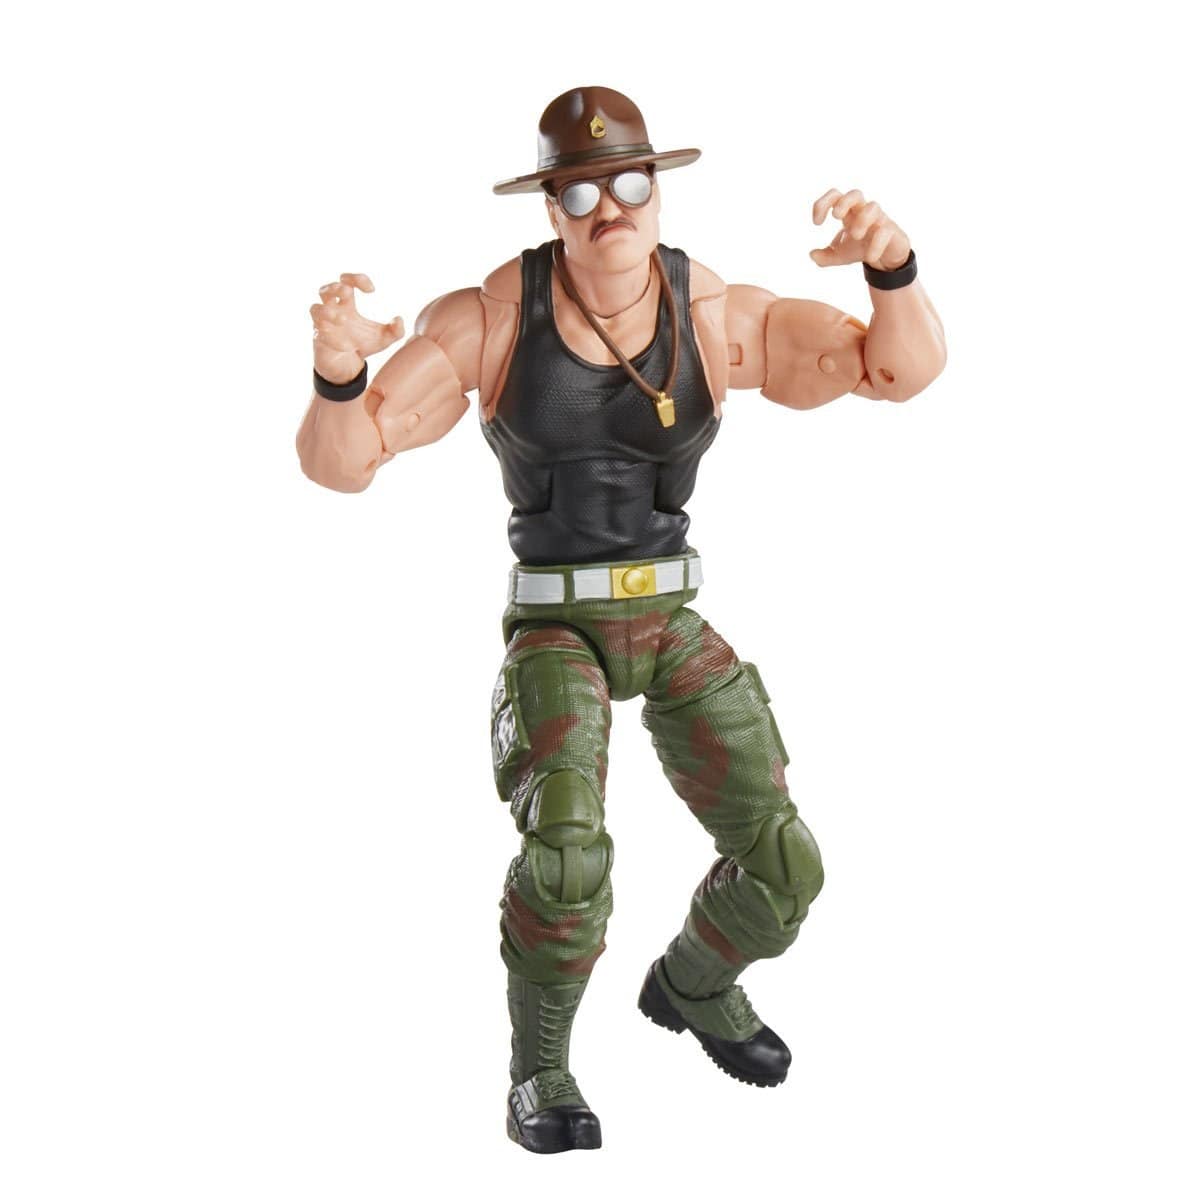 G.I. Joe Classified Series 6-Inch Sgt. Slaughter Action Figure - Exclusive Pop-O-Loco